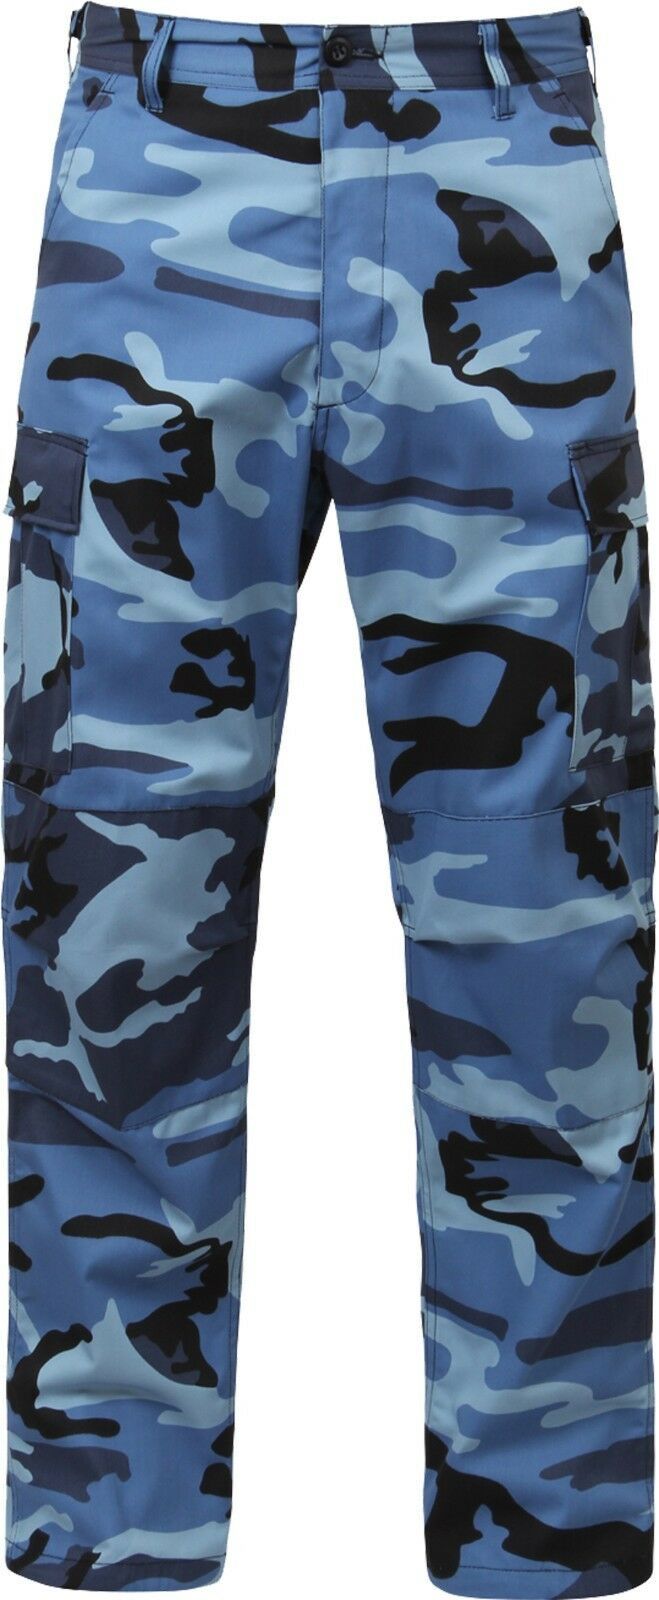 Mens Sky Blue Camouflage Cargo Army Camo Fatigues Military Bdu Pants Pants